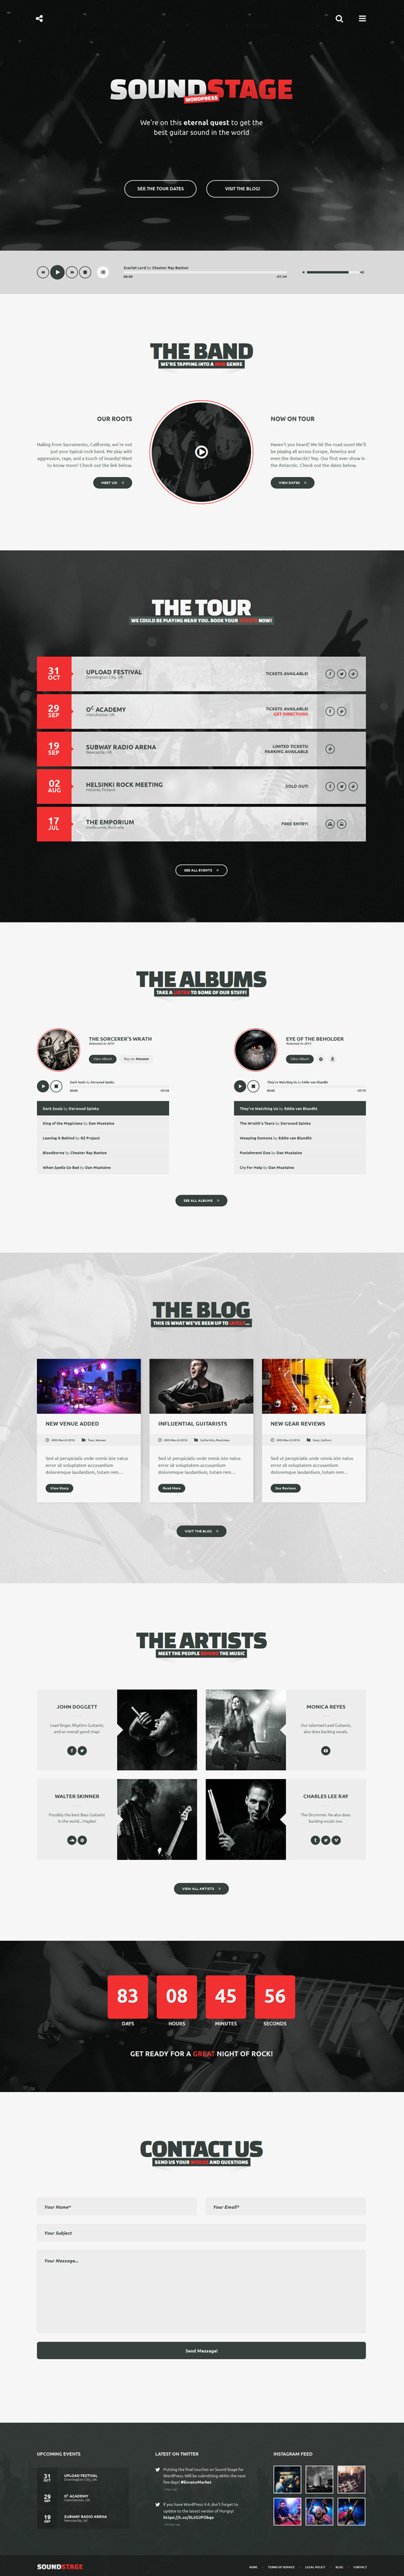 Sound Stage - A Professional WordPress Theme for Music & Bands